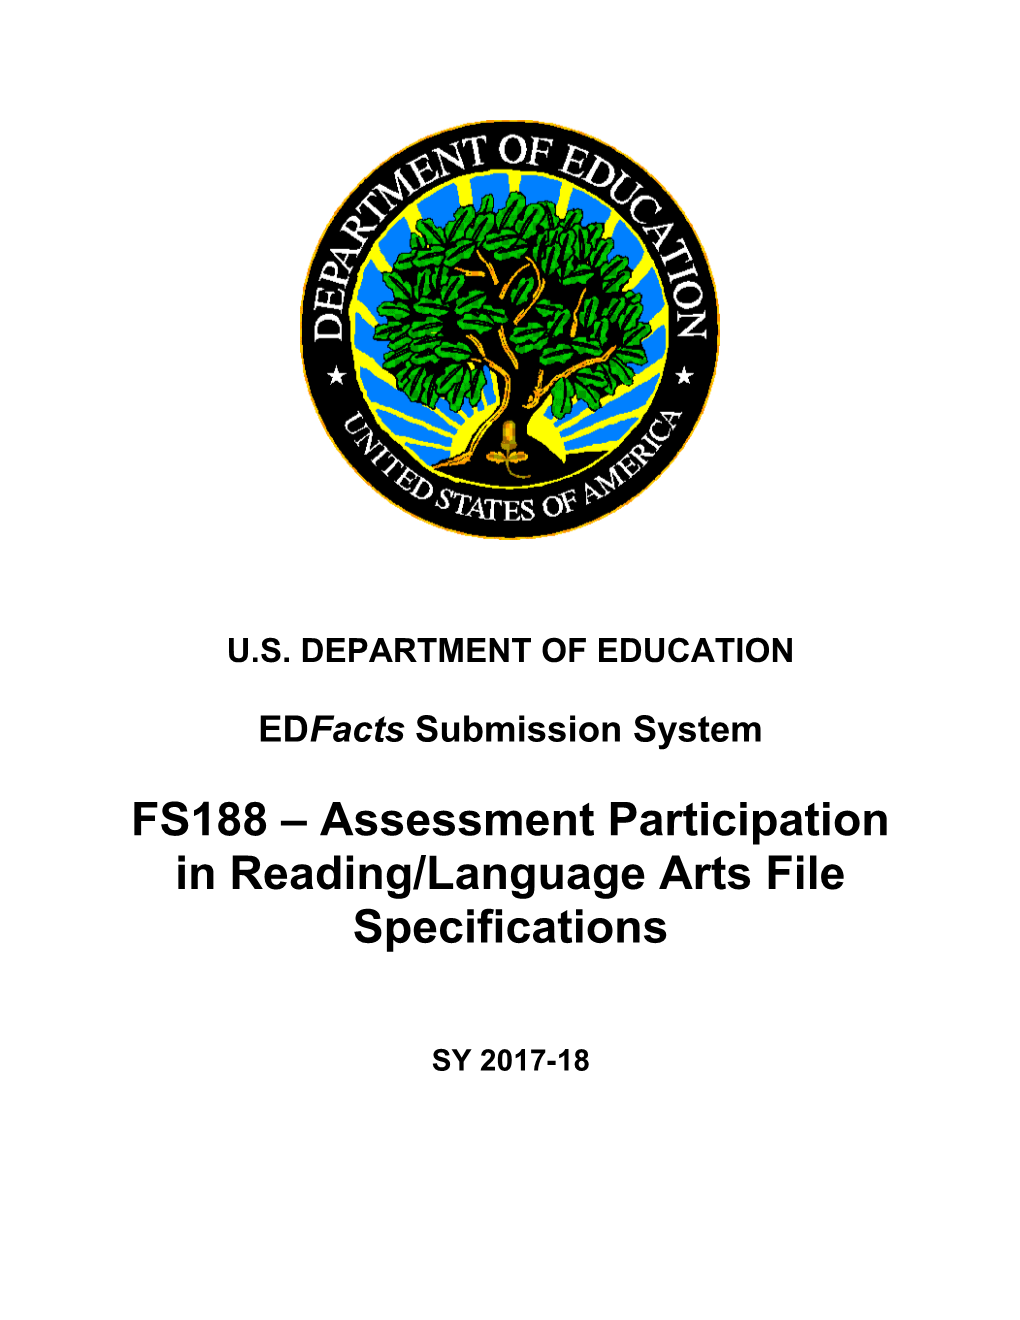 FS188 Assessment Participation in Reading/Language Arts File Specifications (Msword)